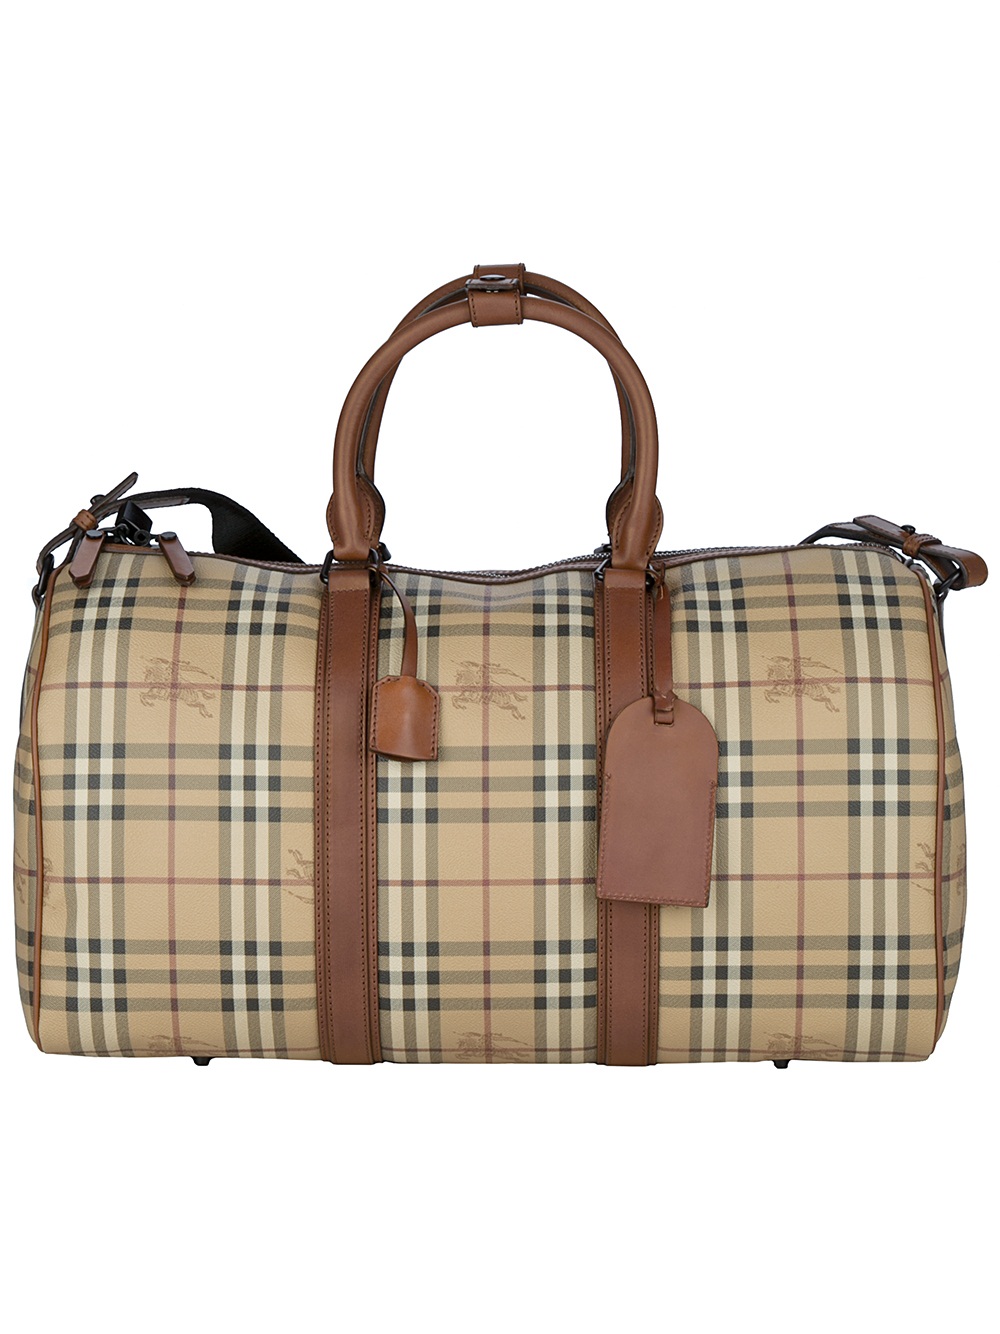 burberry mens carry on luggage